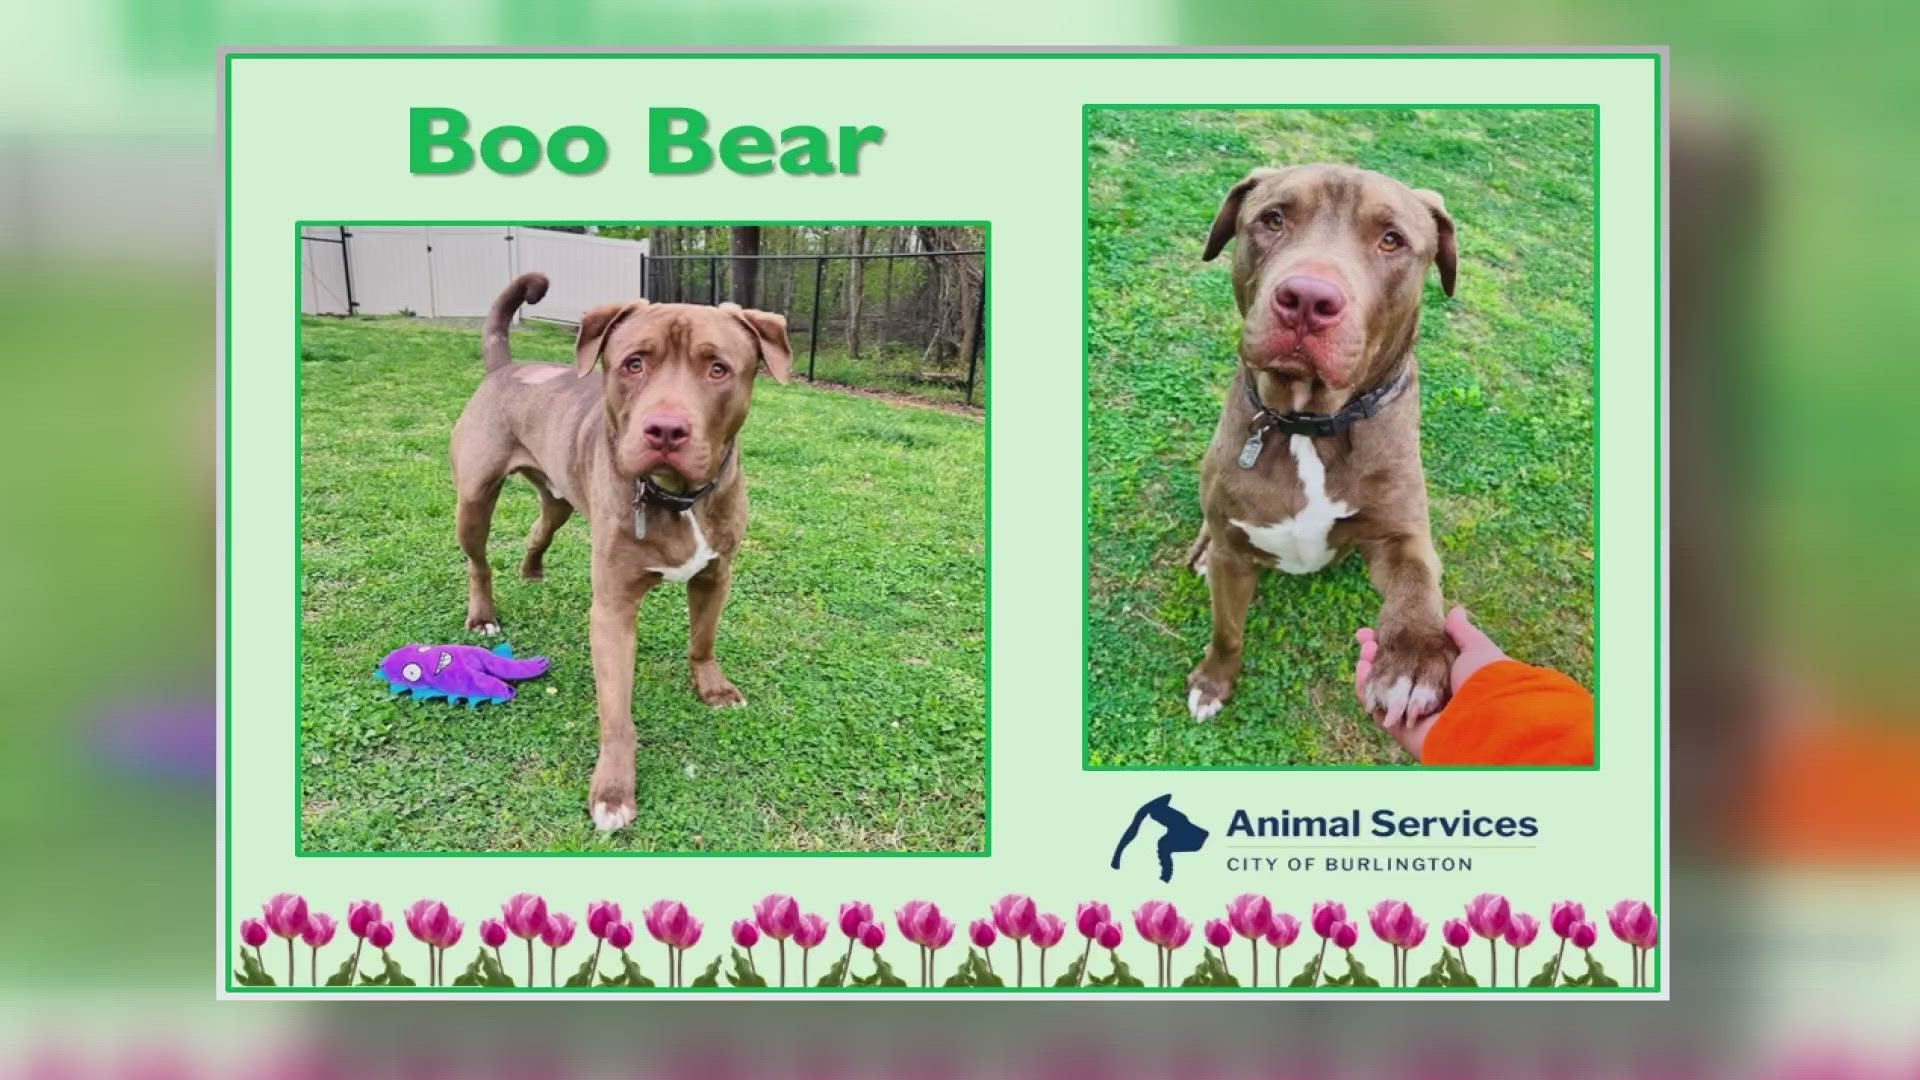 Let's get Boo Bear adopted!